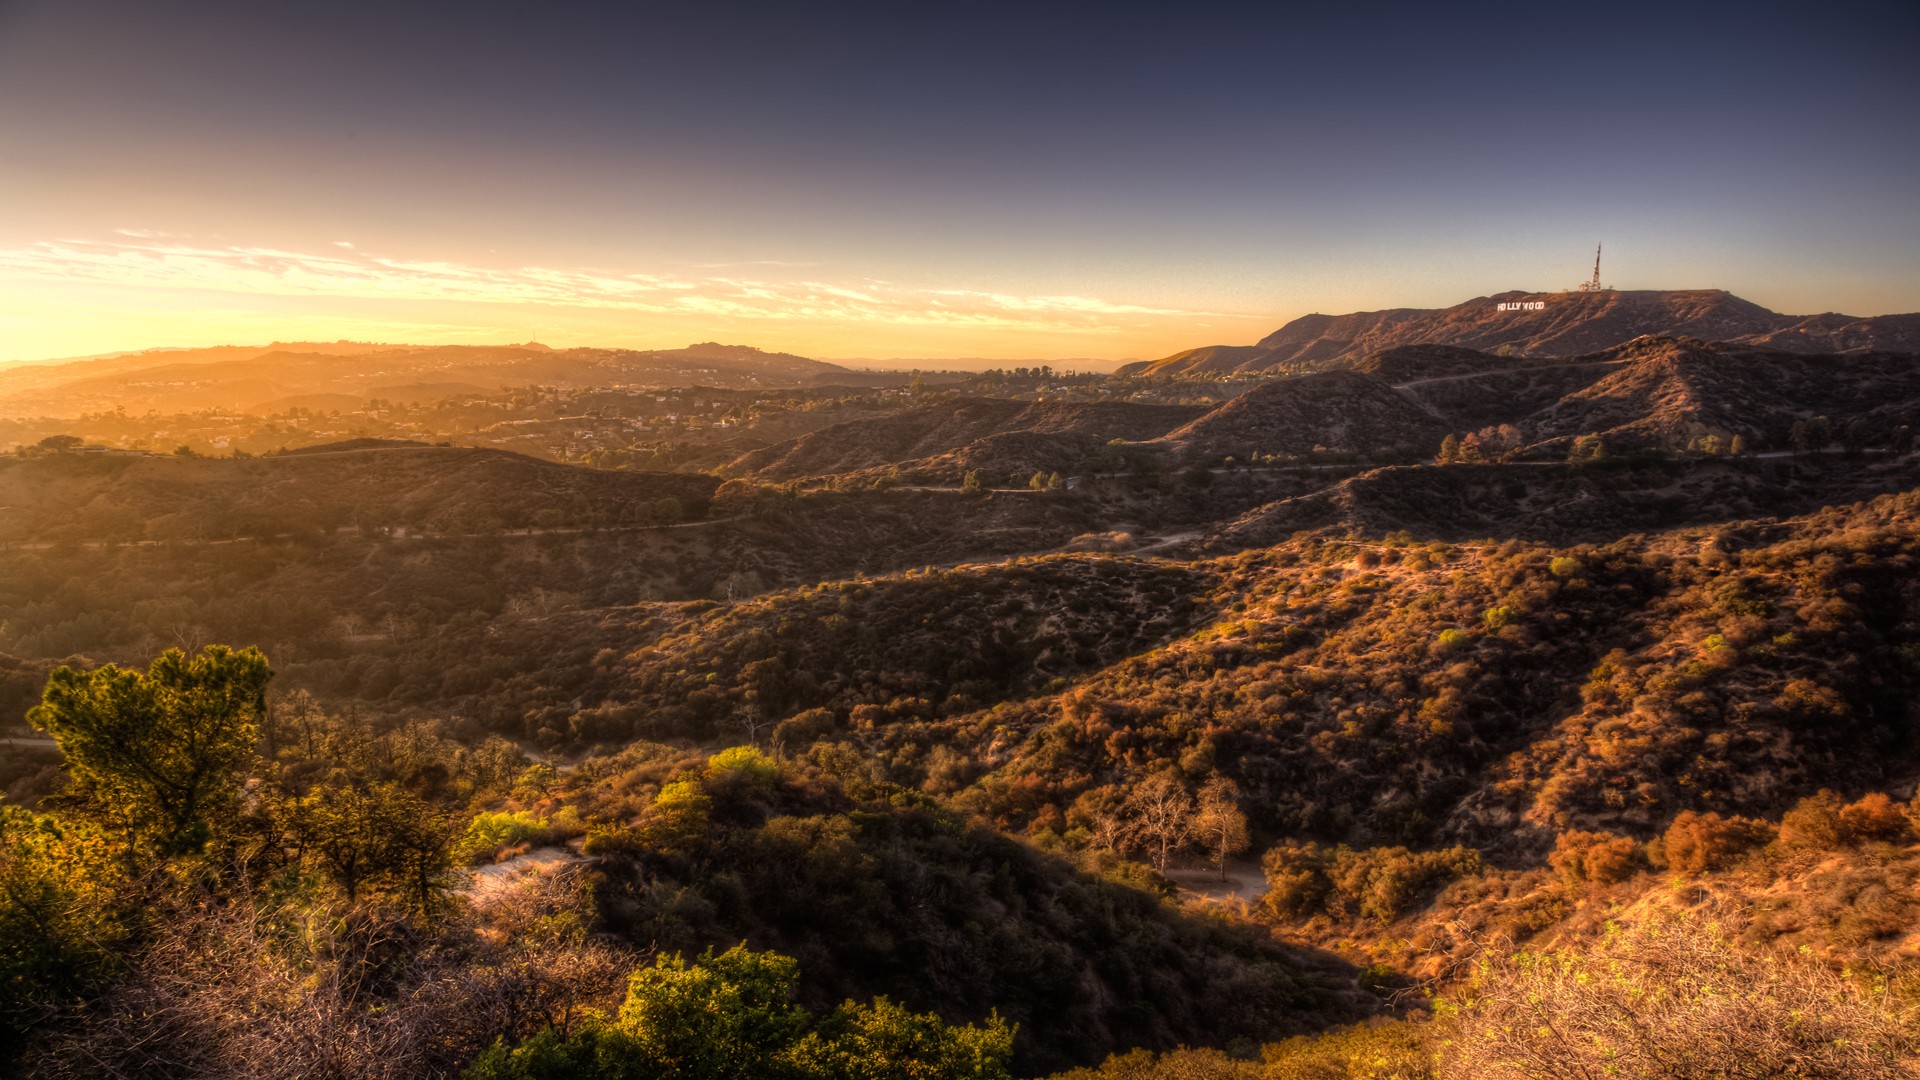 General 1920x1080 landscape nature Hollywood California USA